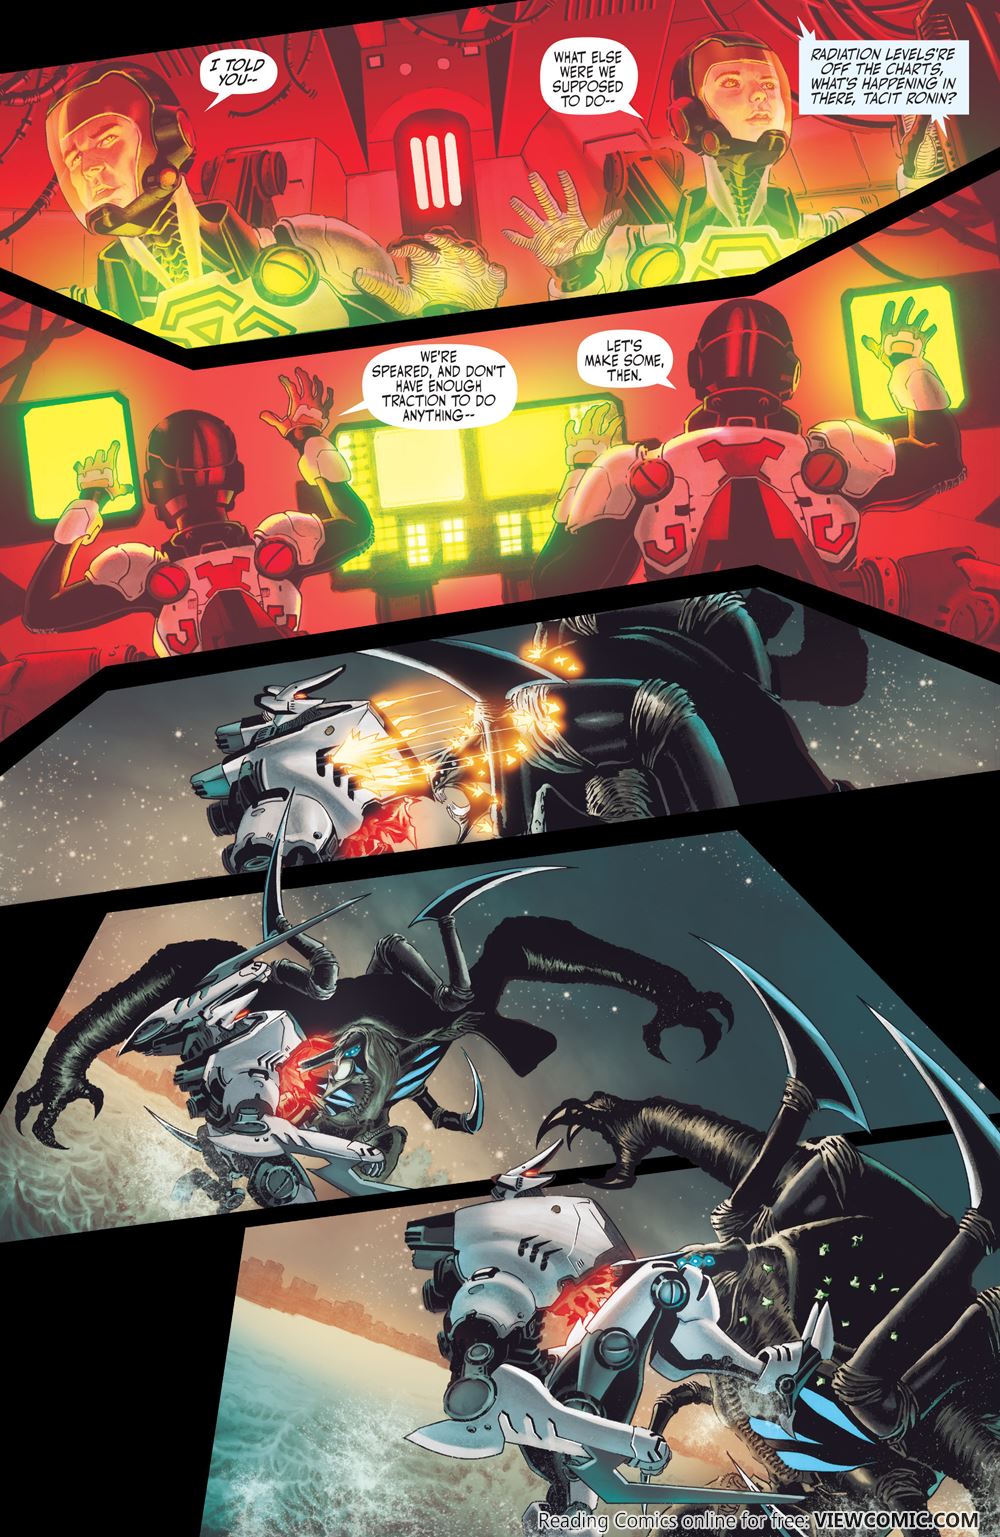 Pacific rim comic porno Pacific Rim Tales From The Drift 001 2015 Read Pacific Rim Tales From The Drift 001 2015 Comic Online In High Quality Read Full Comic Online For Free Read Comics Online In High Quality